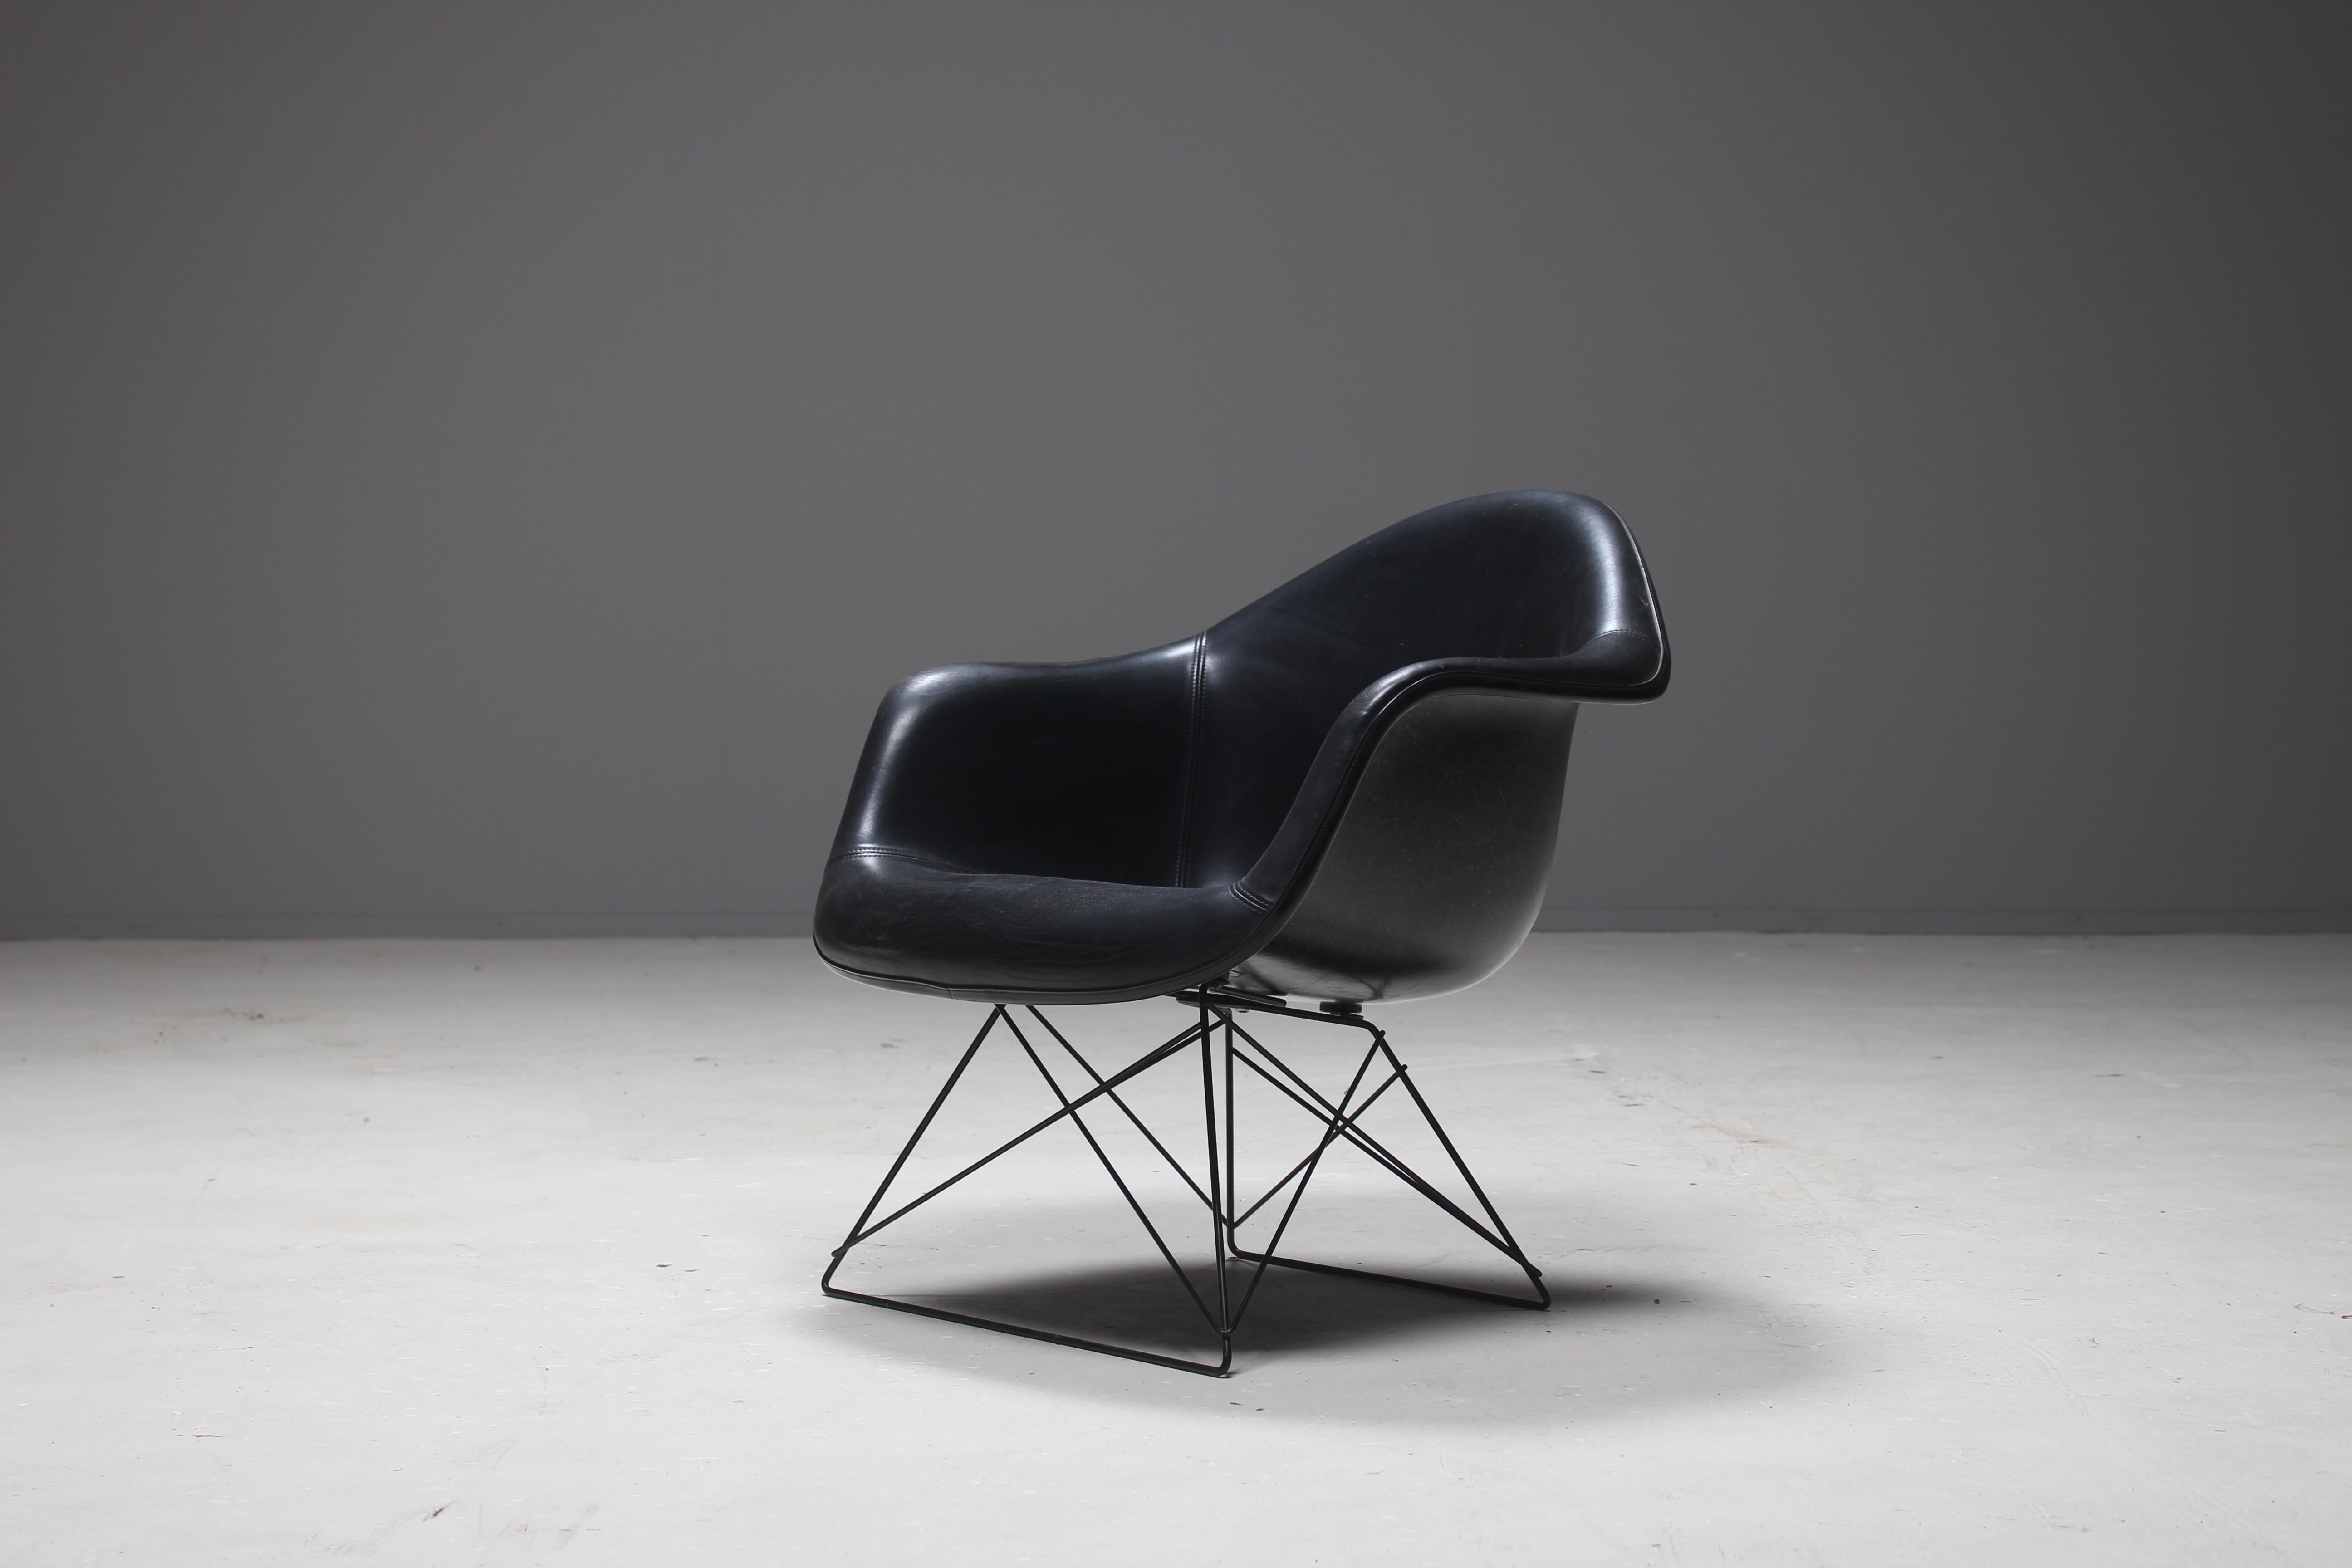 A full black original fiberglass armshell chair designed by Charles and Ray Eames and produced by Herman Miller in the USA. The fiberglass shell is upholstered with a comfortable faux leather.
A famous well known design which came in very different